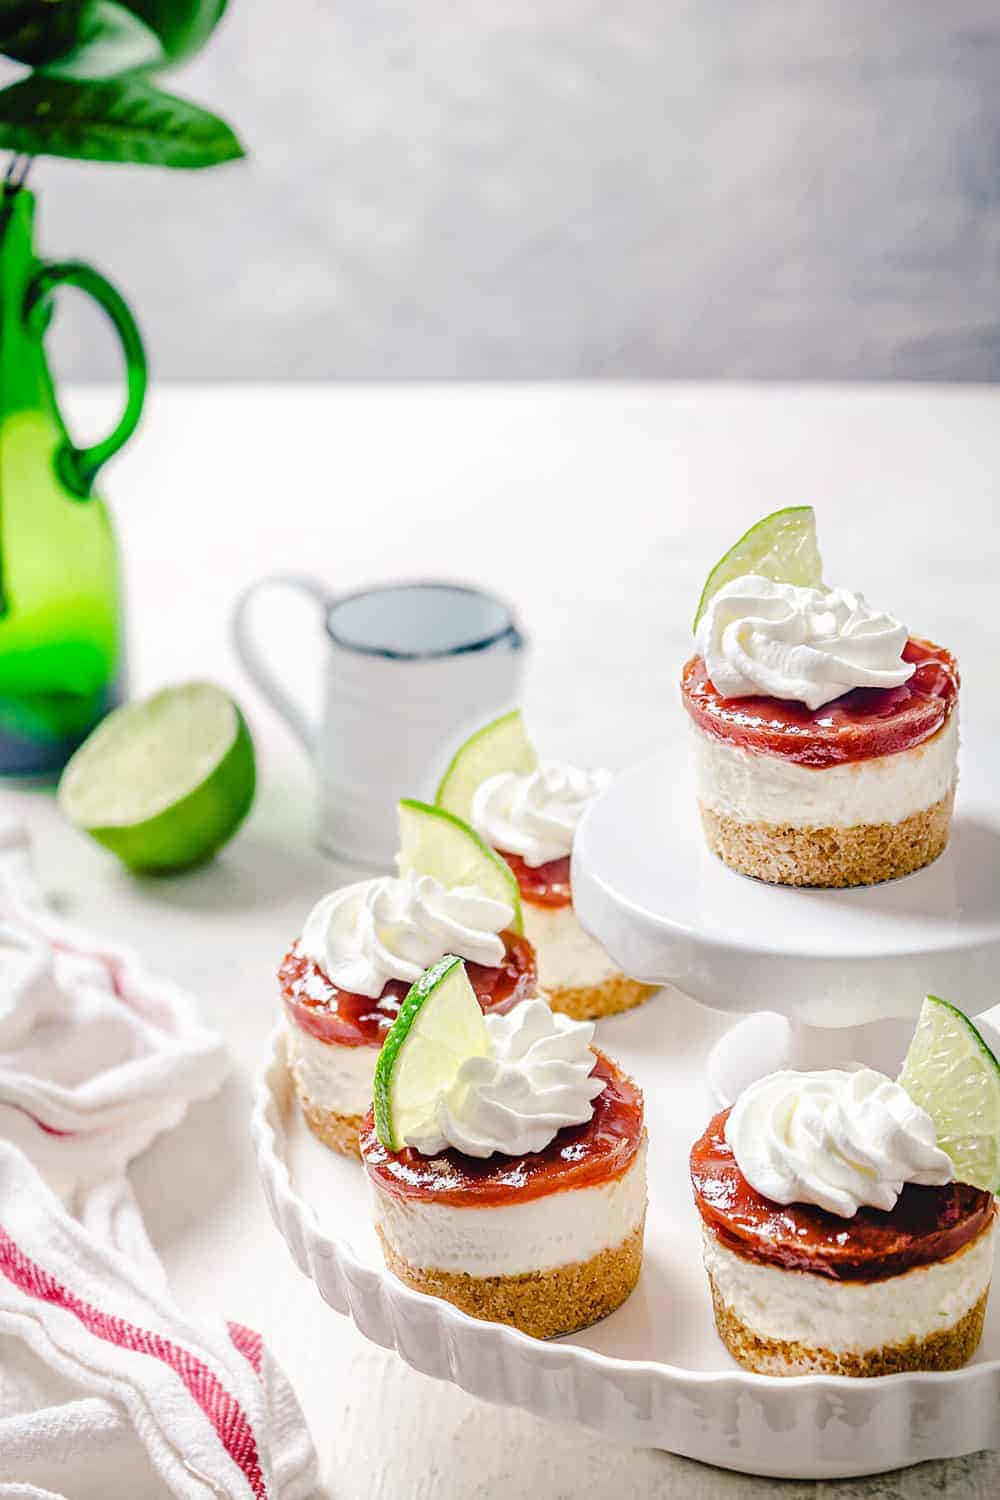 Individual cheesecakes on a white plate served on a white table with lime slices.